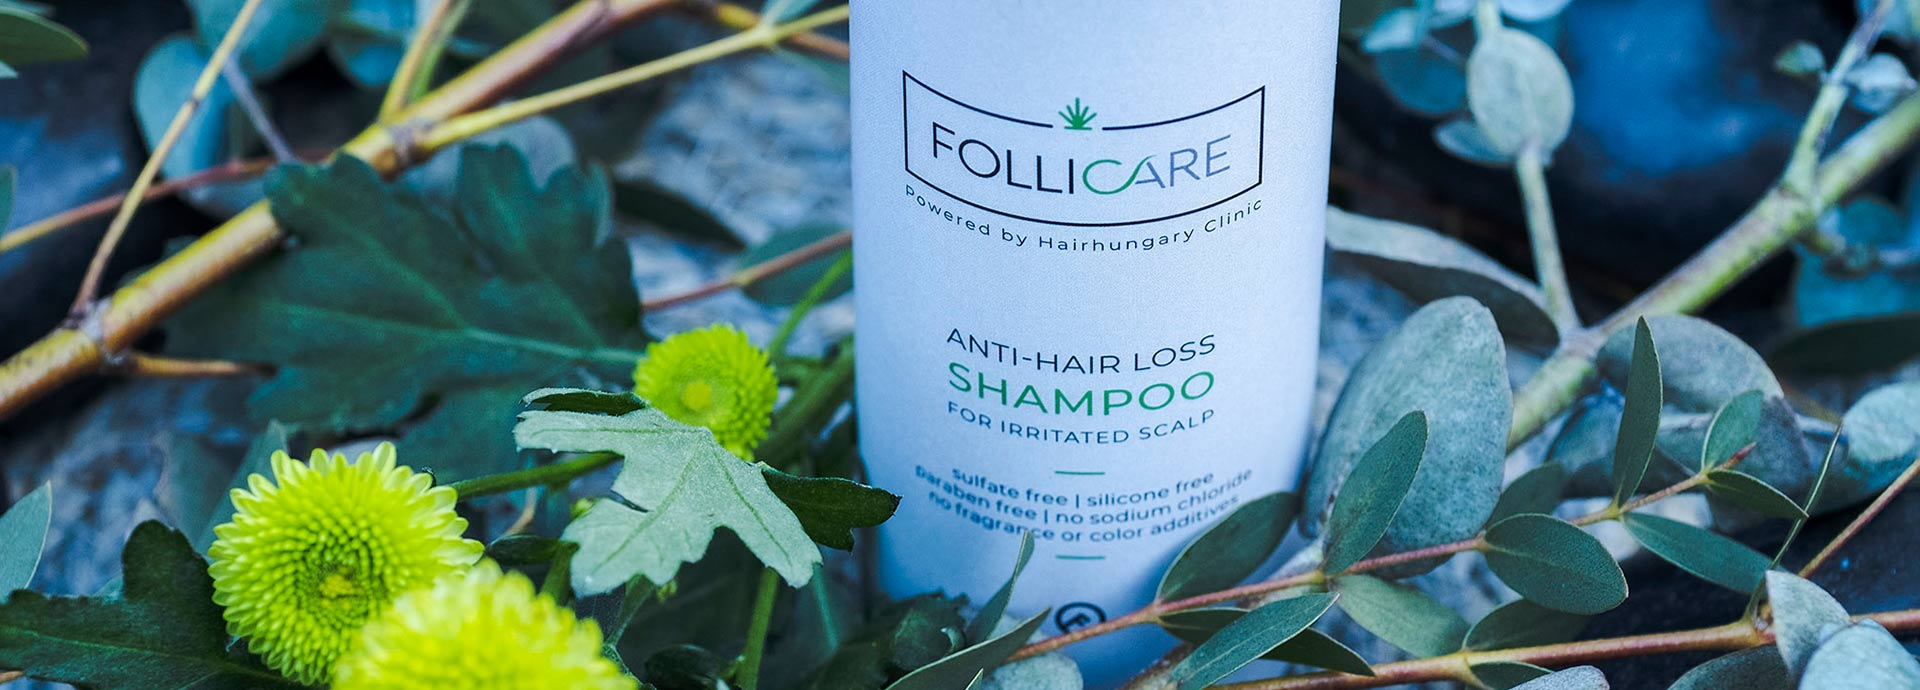 Follicare - Naturally with the power of herbs!